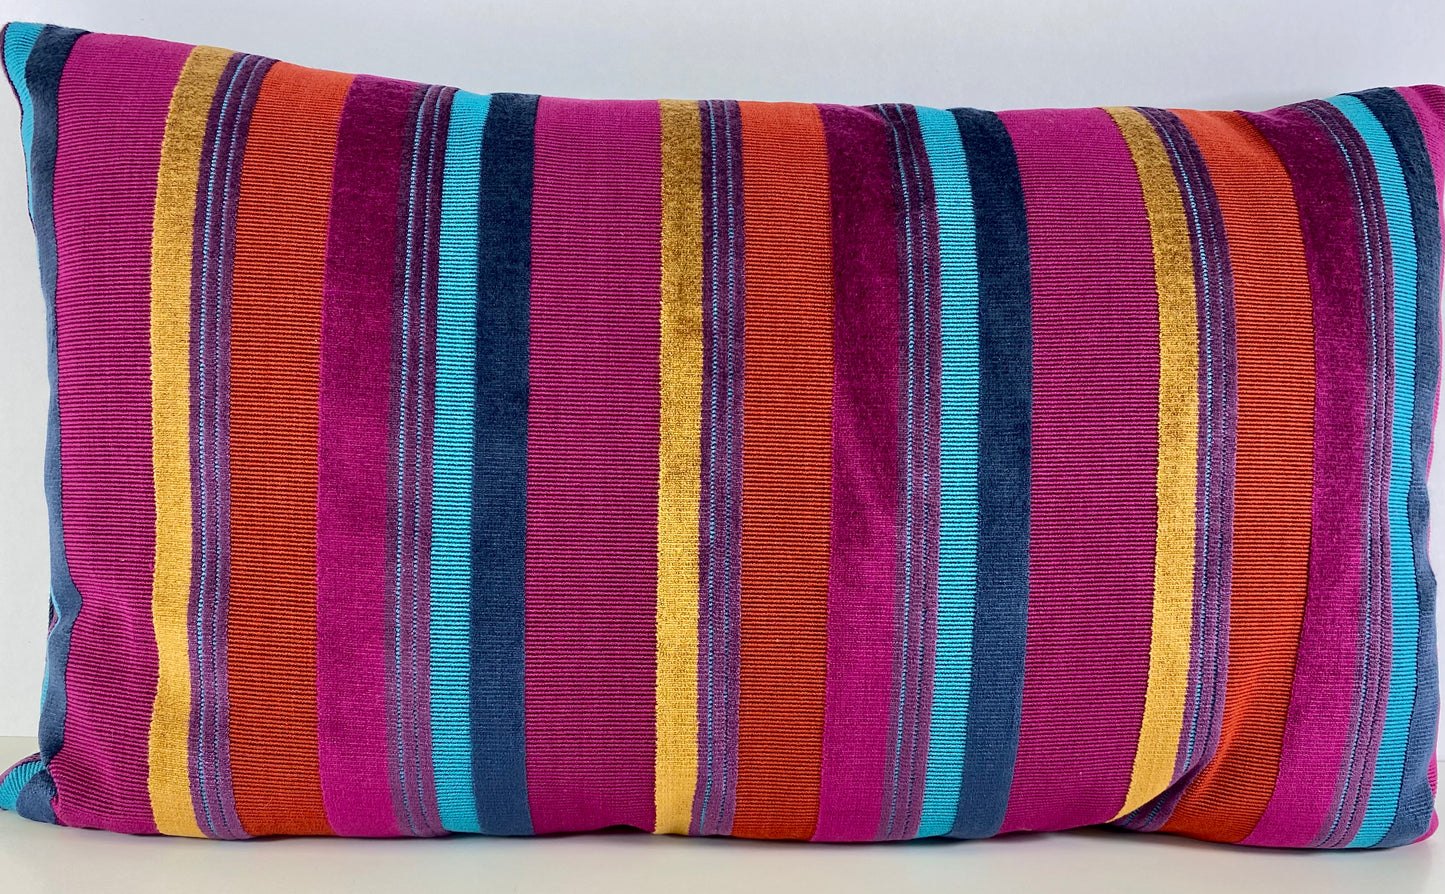 Luxury Lumbar Pillow; 24" x 14" - Spark and Spunk a vibrant striped pattern of Fuchsia, blues, gold and orange